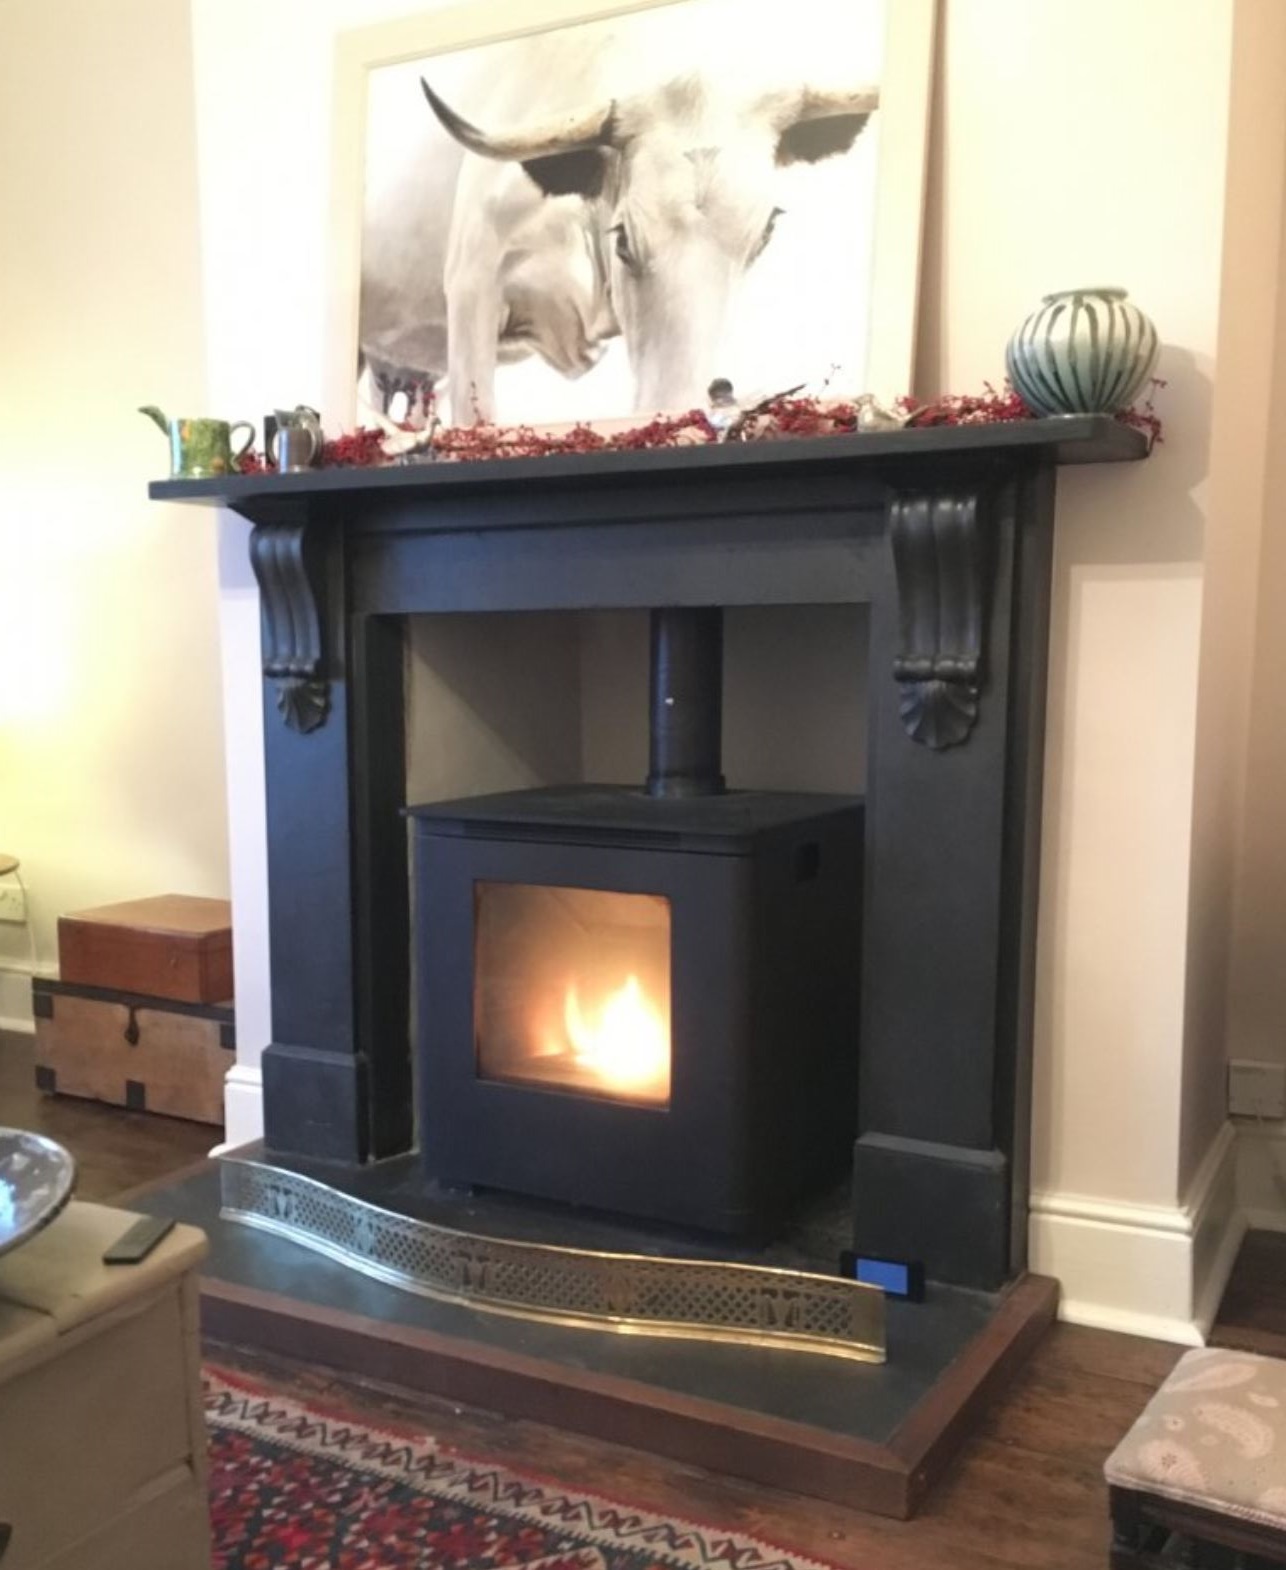 The best pellet fed wood burning stoves for UK homes - designed specifically to replace your traditional stove and still look the part in your home